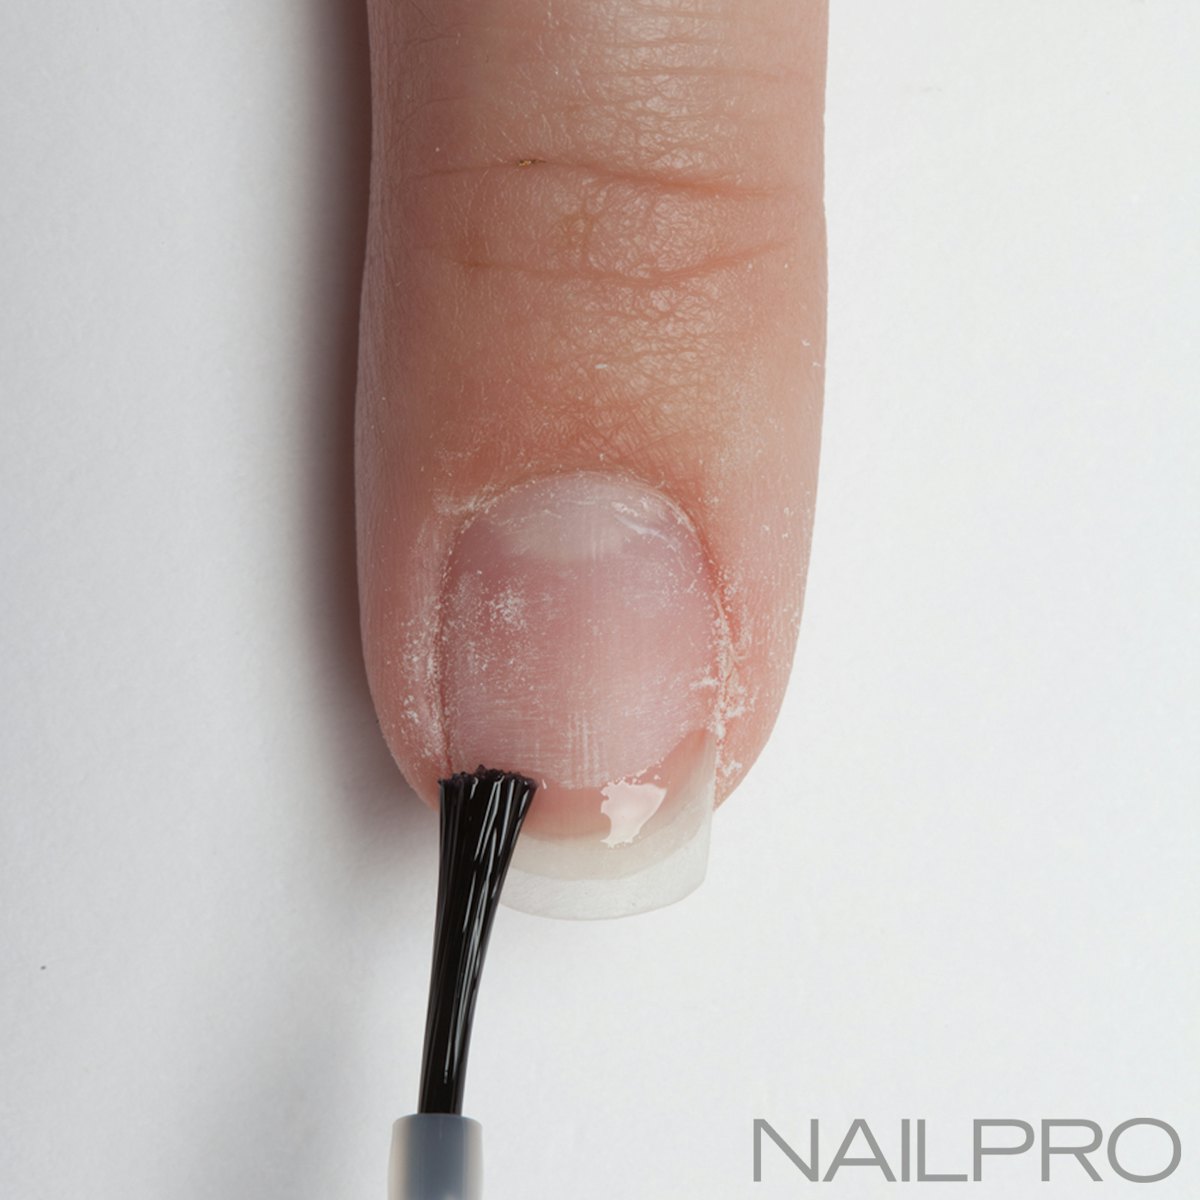 How To Build Temporary Nail Extensions | Nailpro